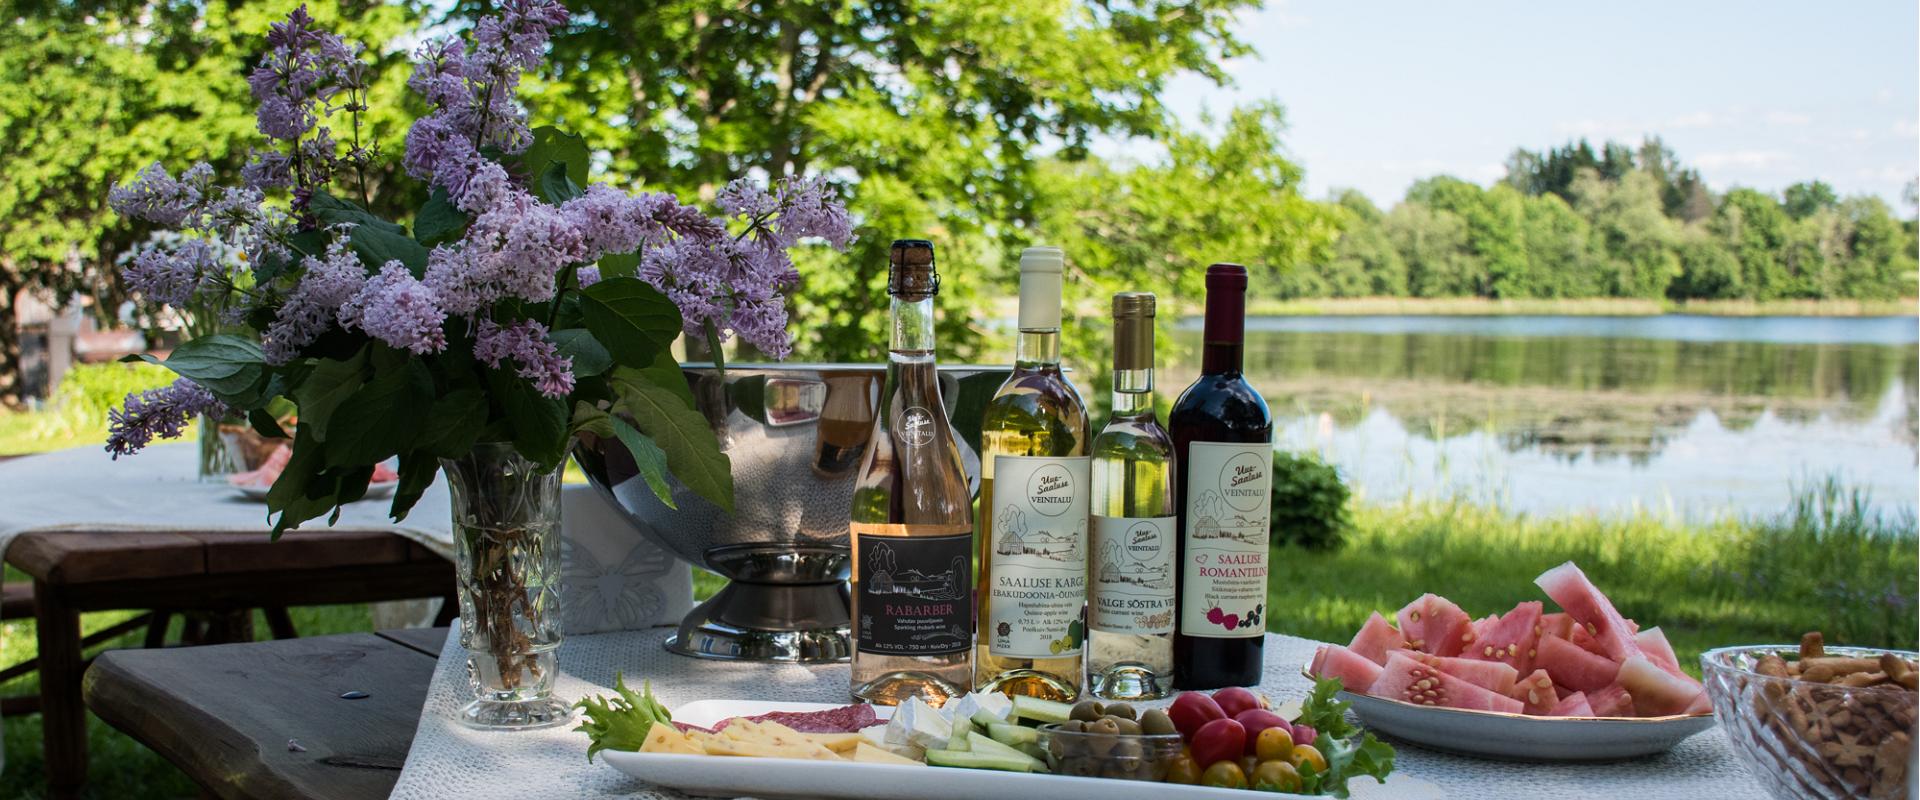 Estonian Wine Route Tour and a beautiful snack and wine tasting table in summer